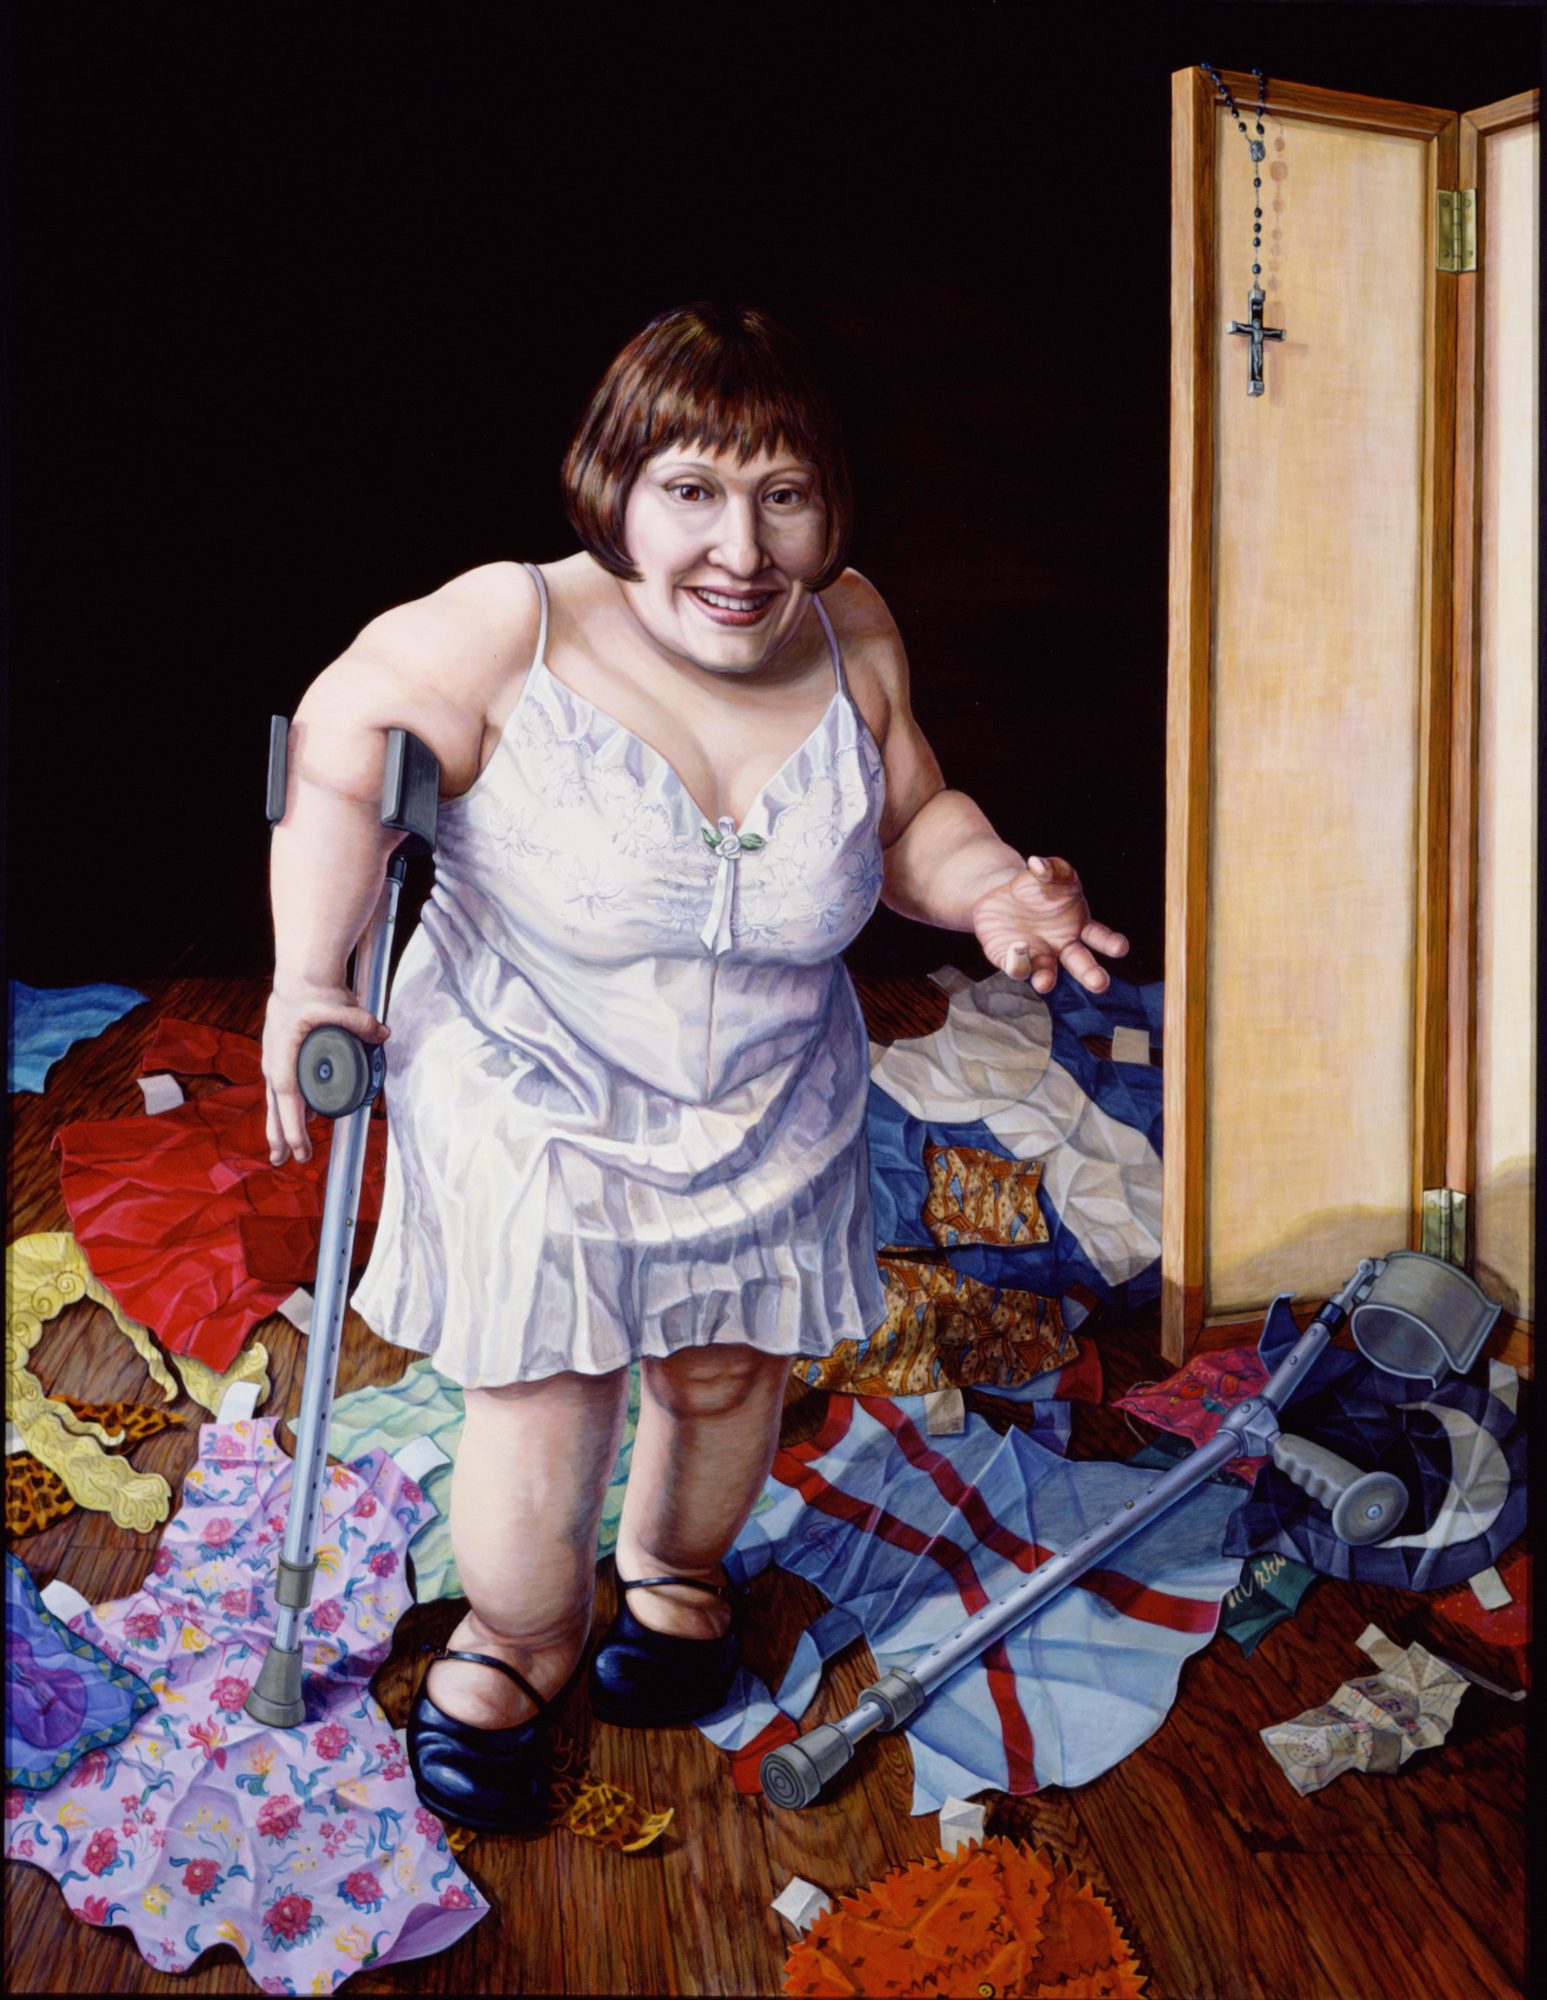 painting of woman wearing a slip dress, on crutches in a room with clothes all over the floor and a rosary hung on a screen divider